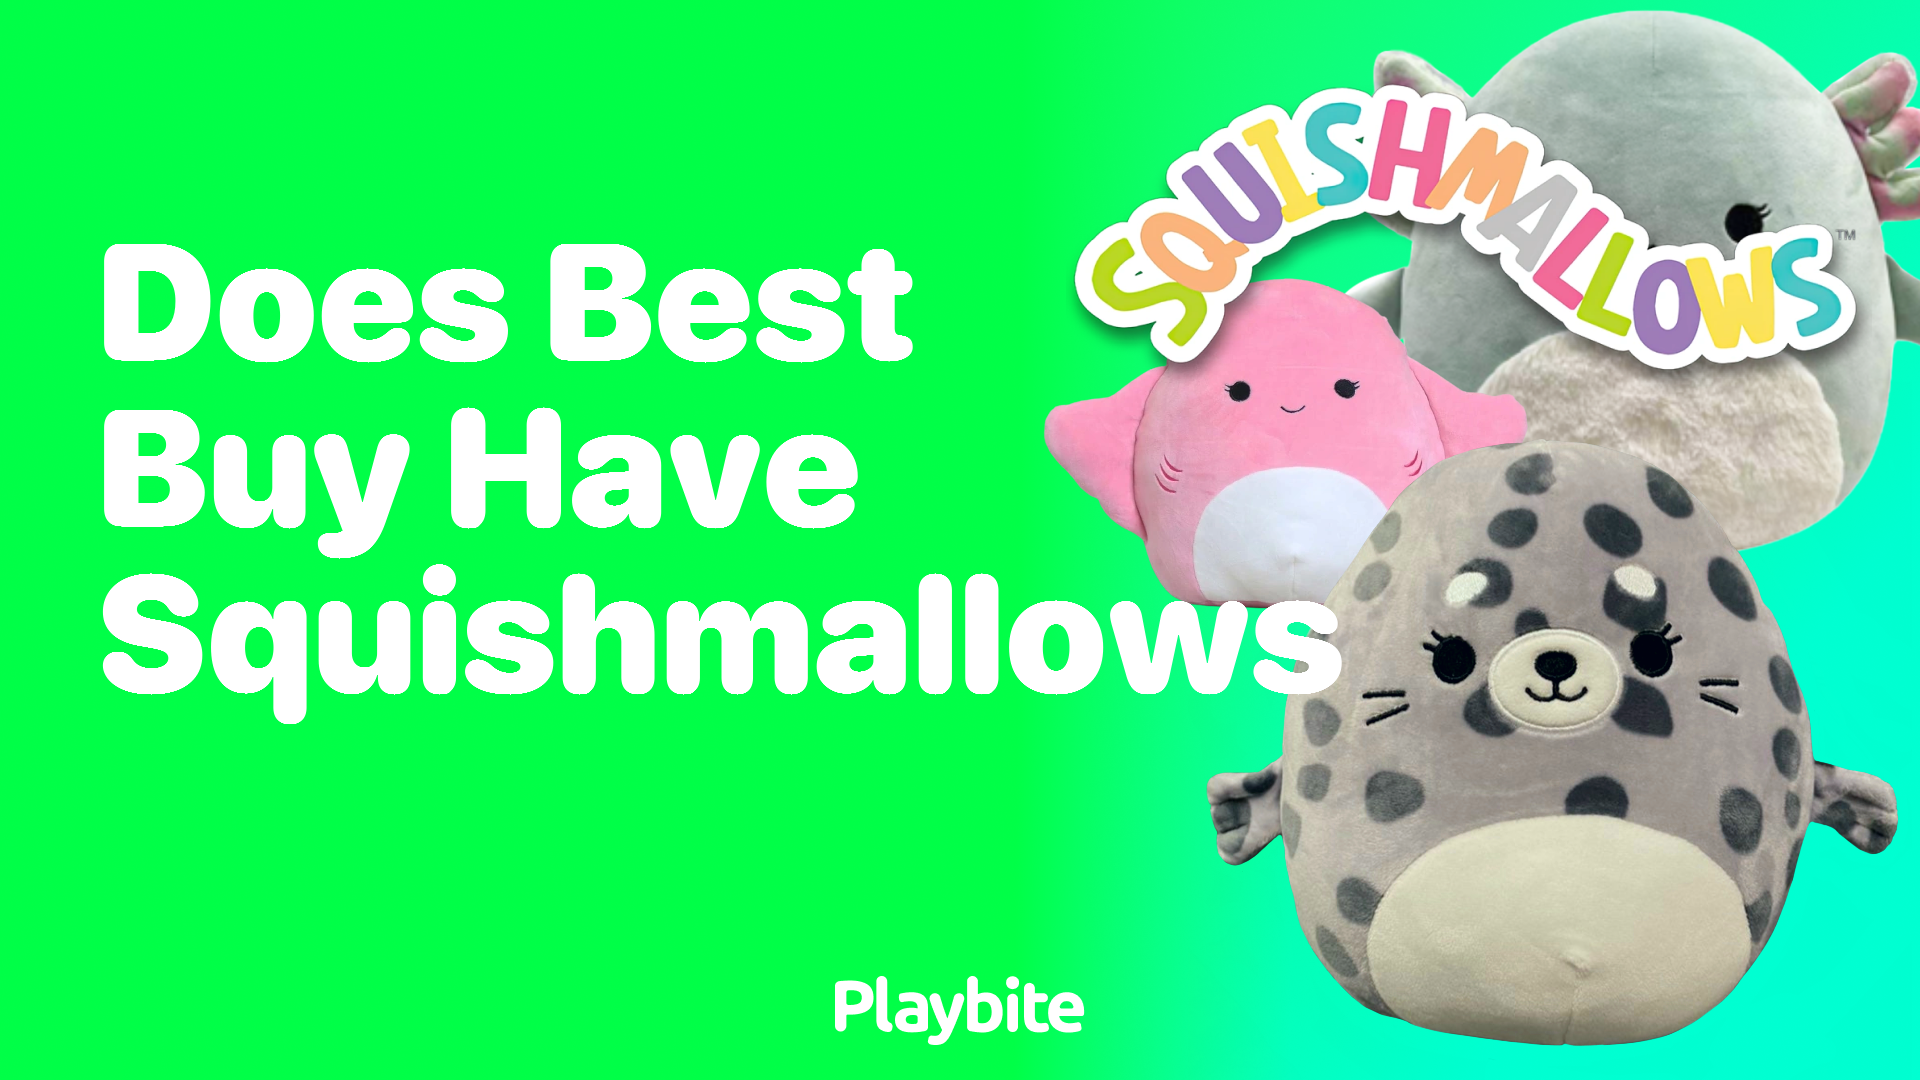 Does Best Buy Have Squishmallows? Find Out Here!